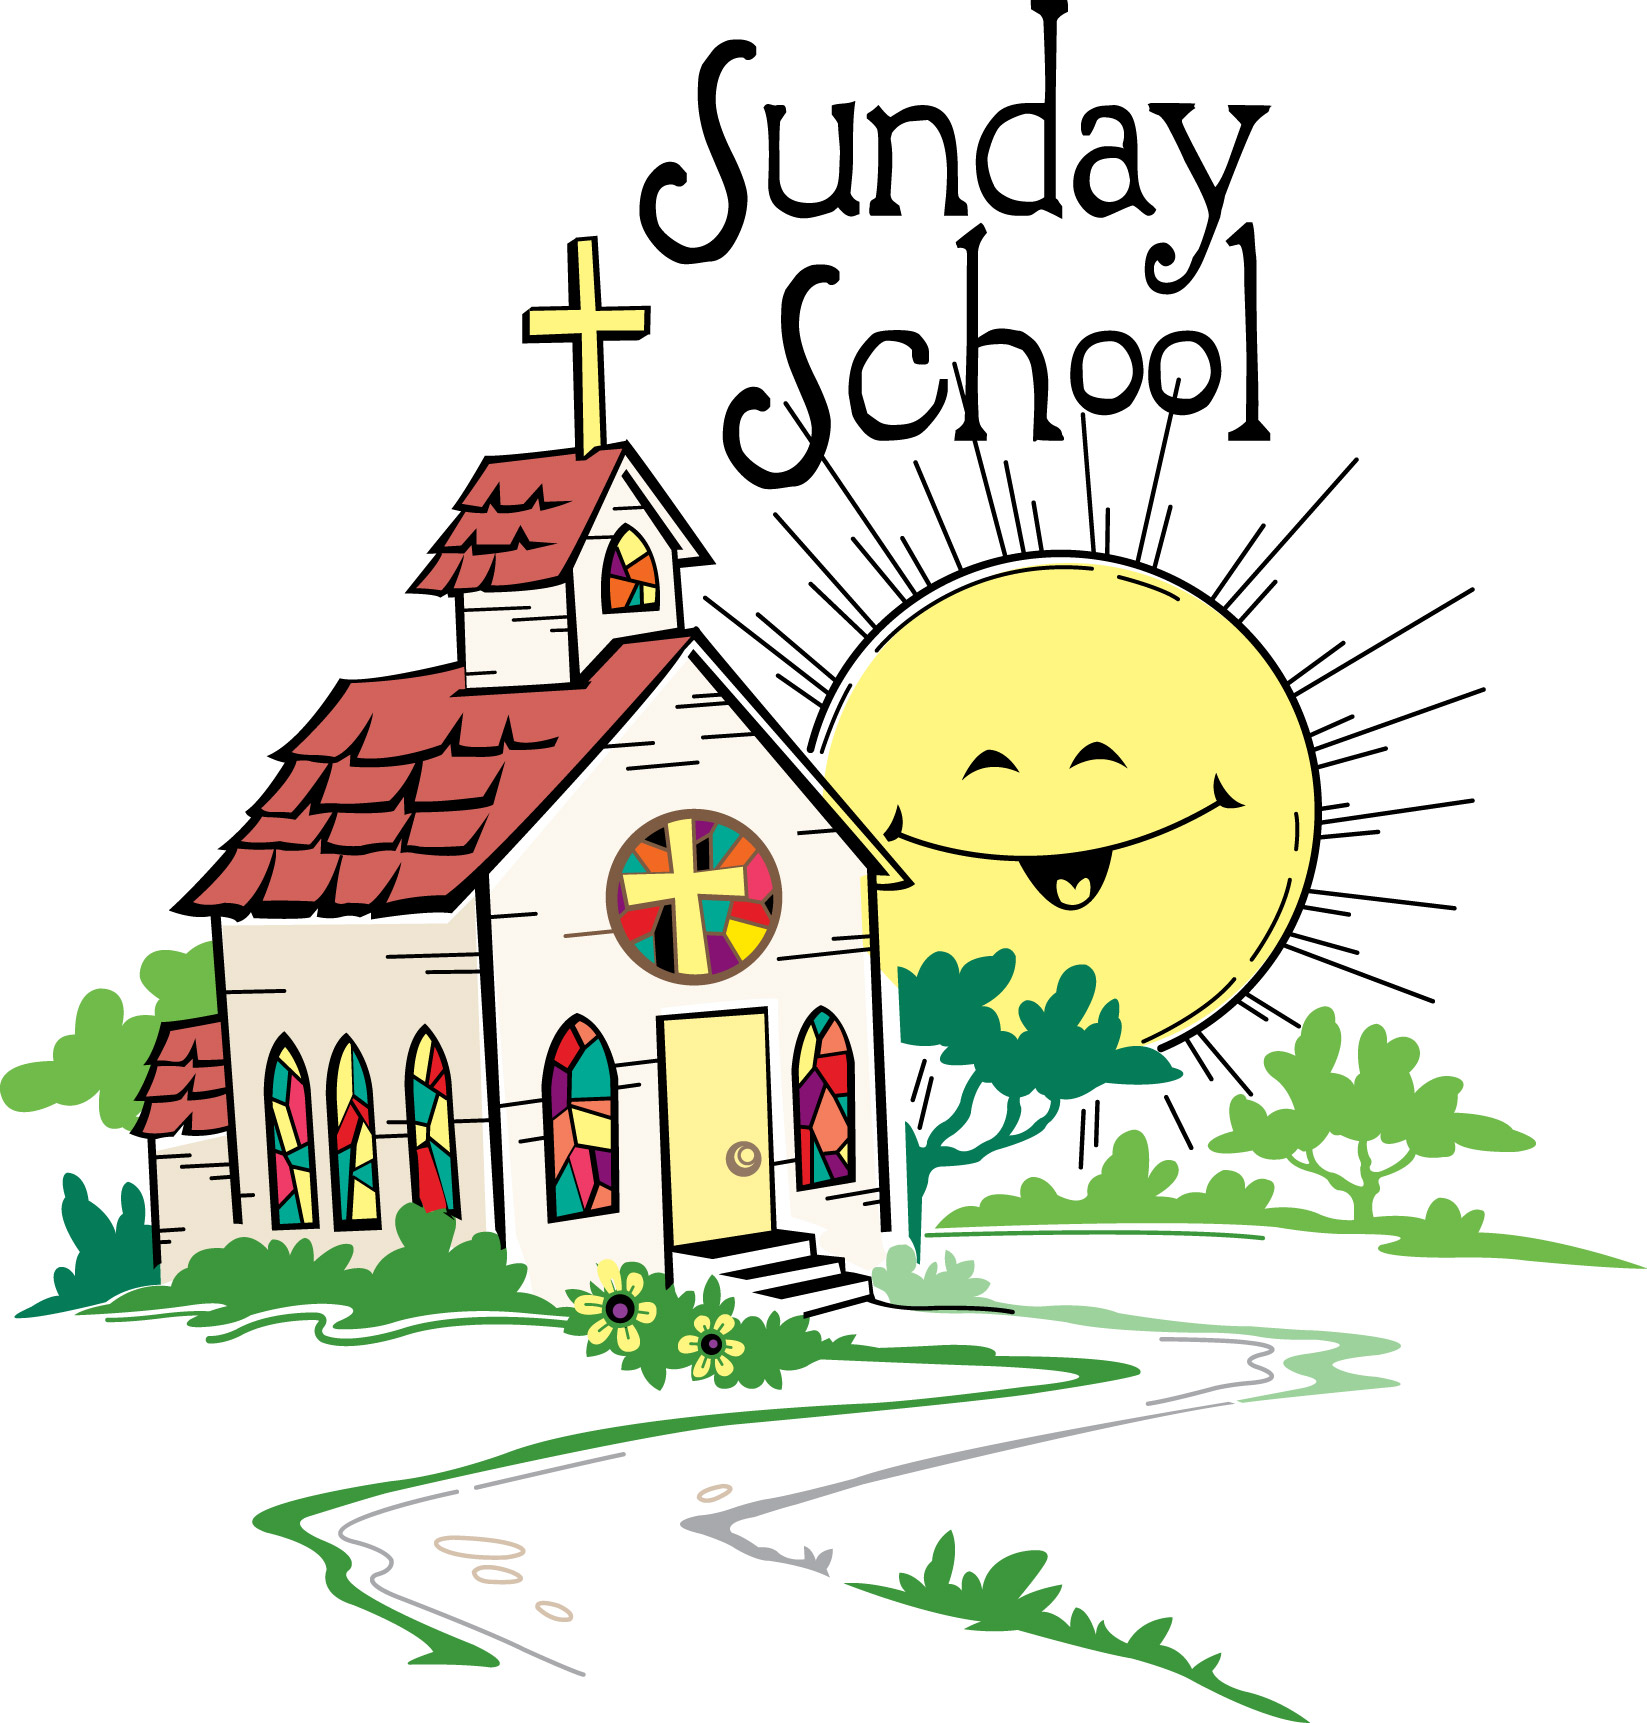 Sunday school clip art free clipart images 4